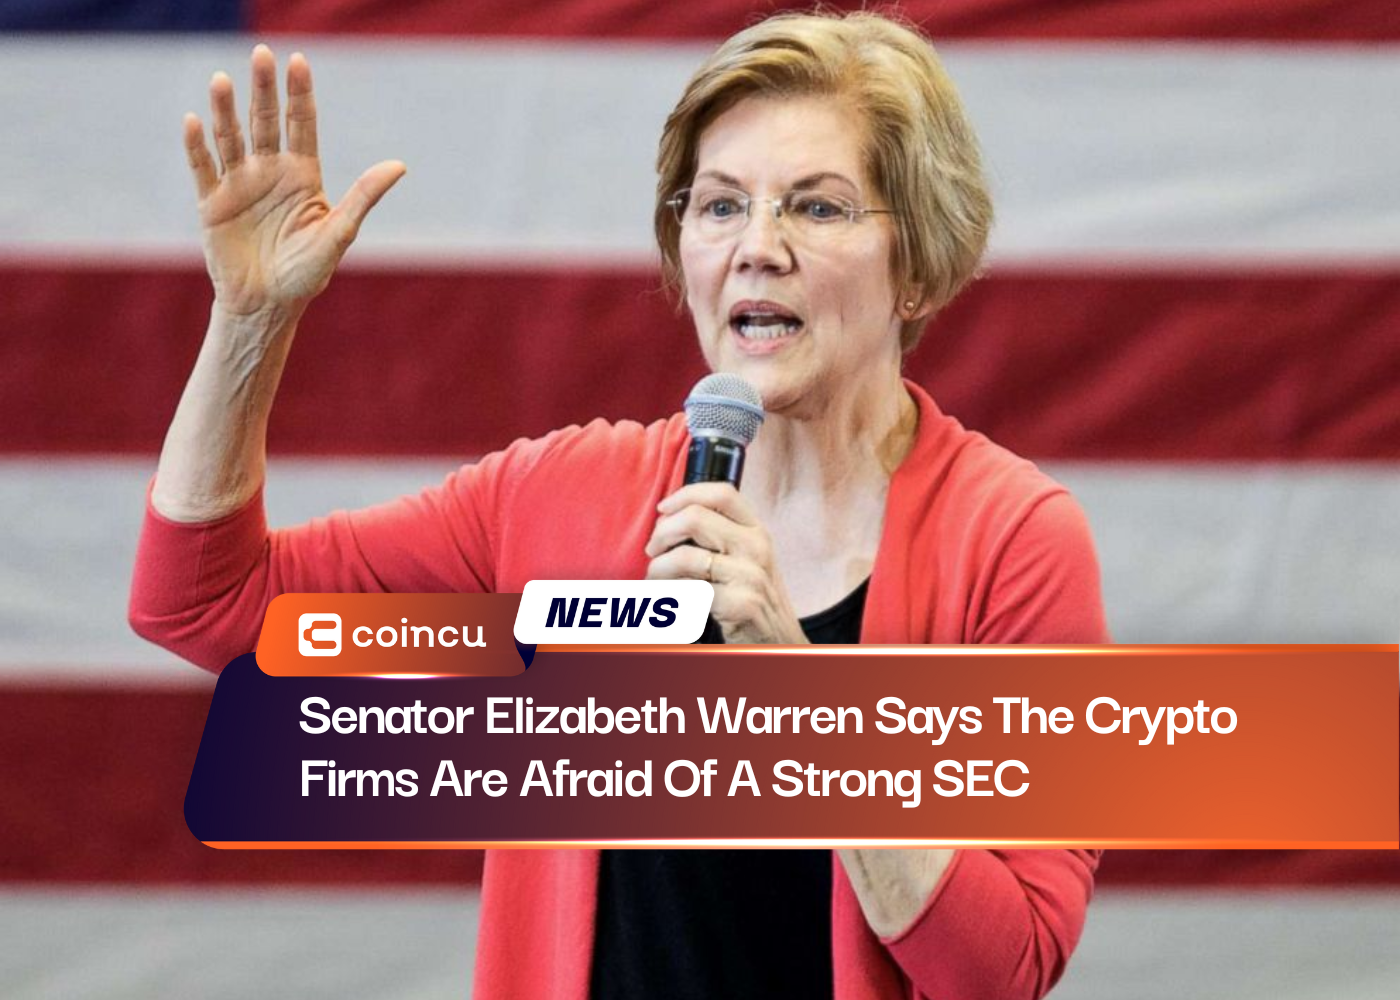 Senator Elizabeth Warren Says The Crypto Firms Are Afraid Of A Strong SEC